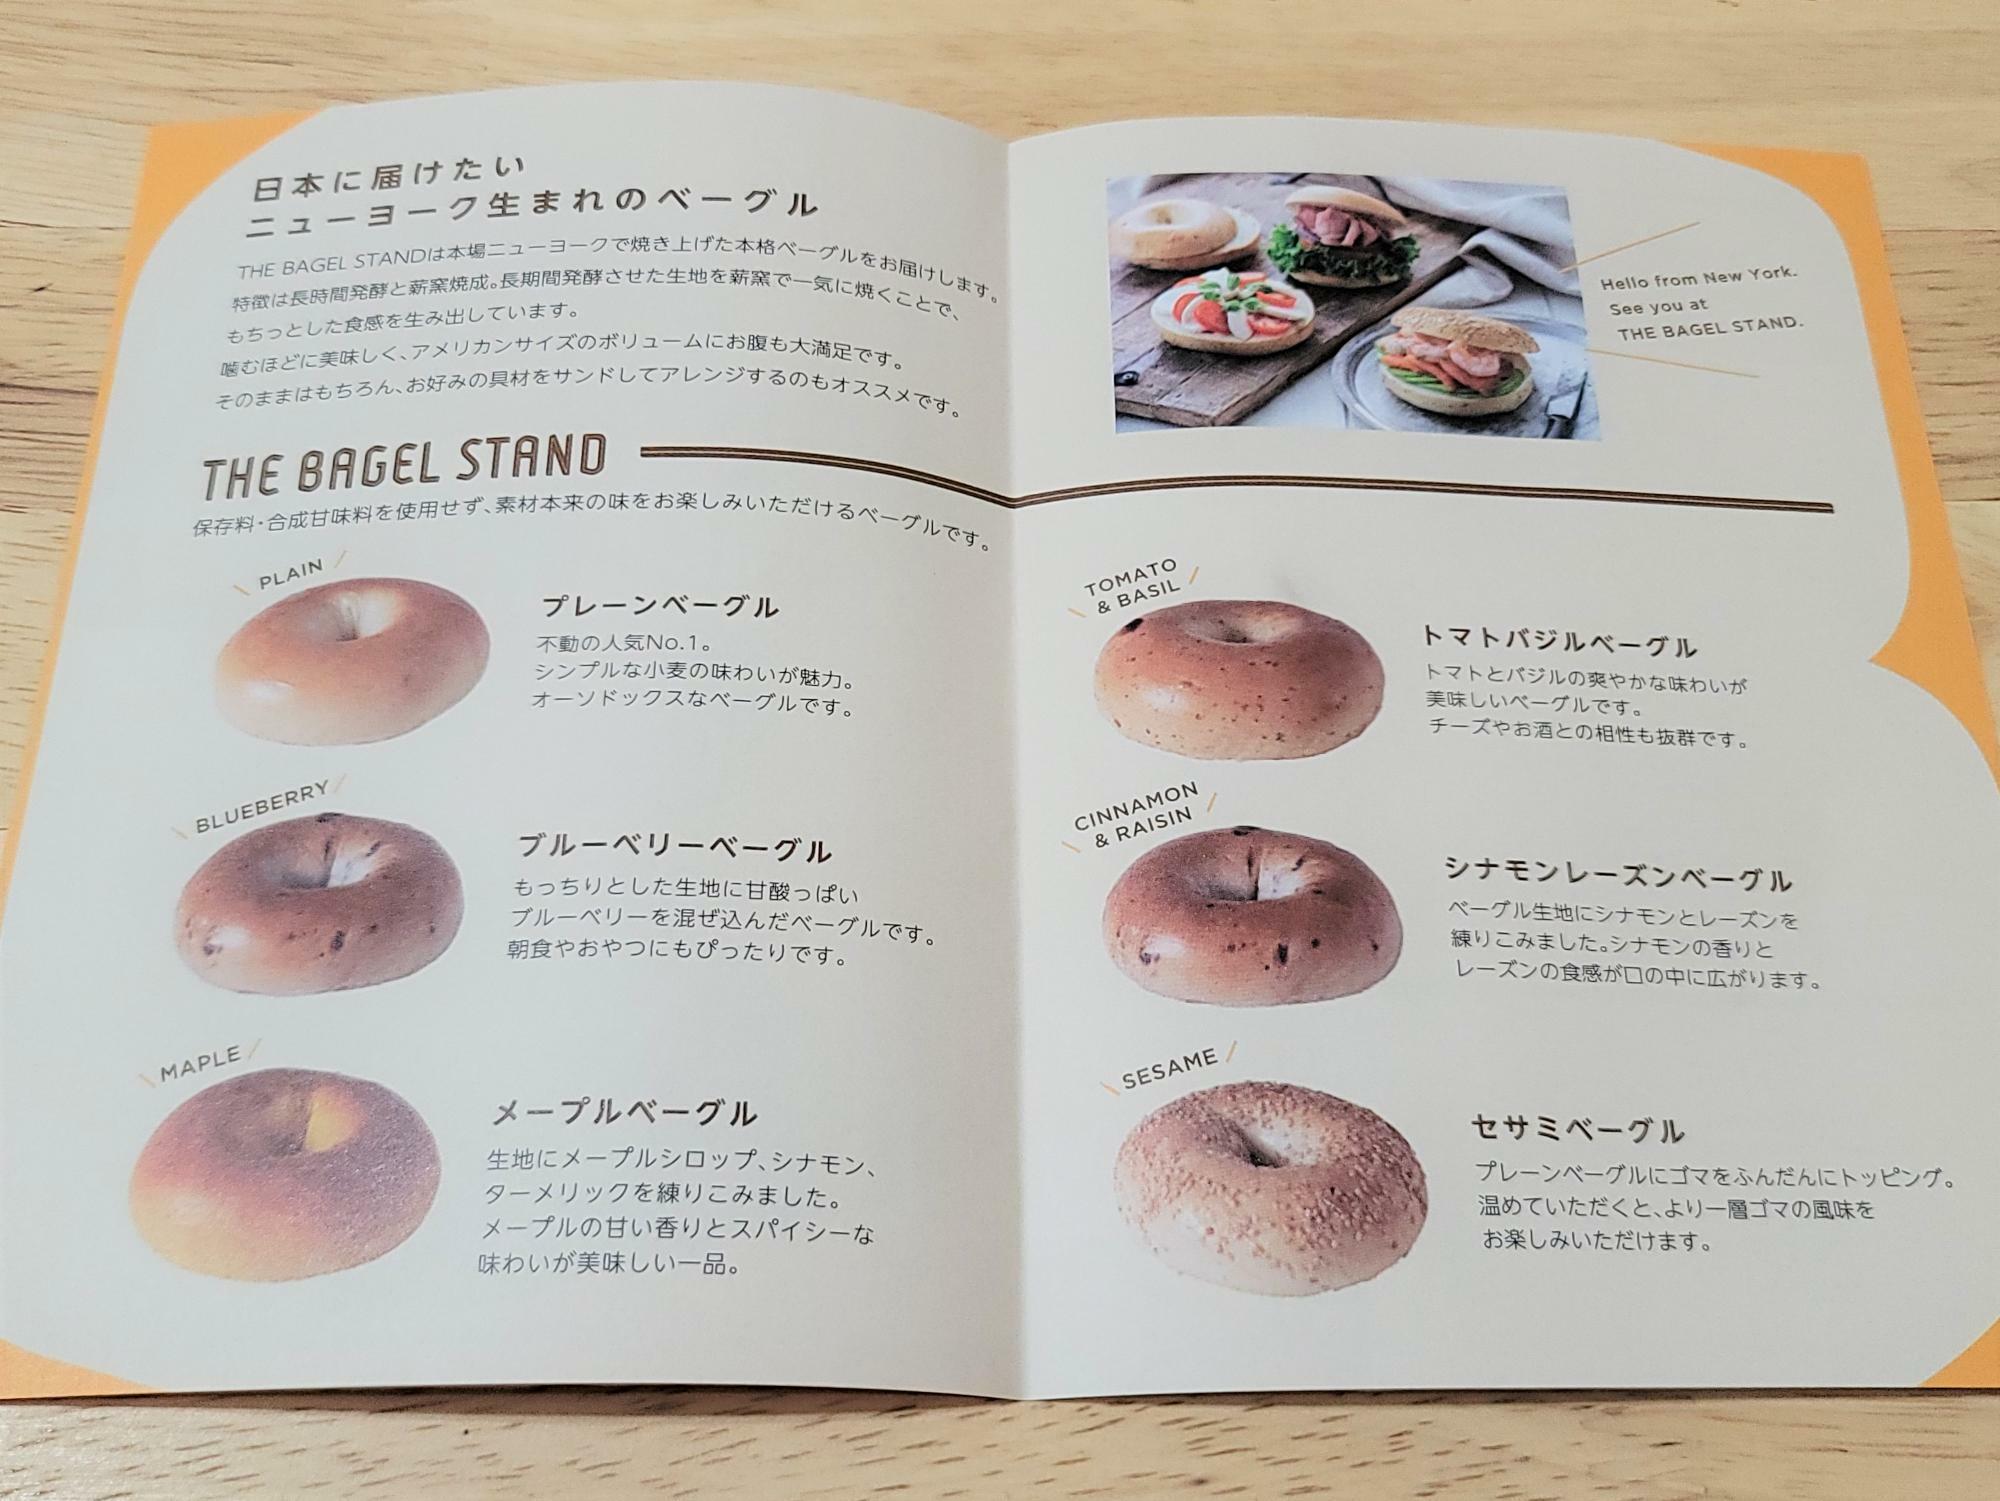 「THE BAGEL STAND」のパンフレット。